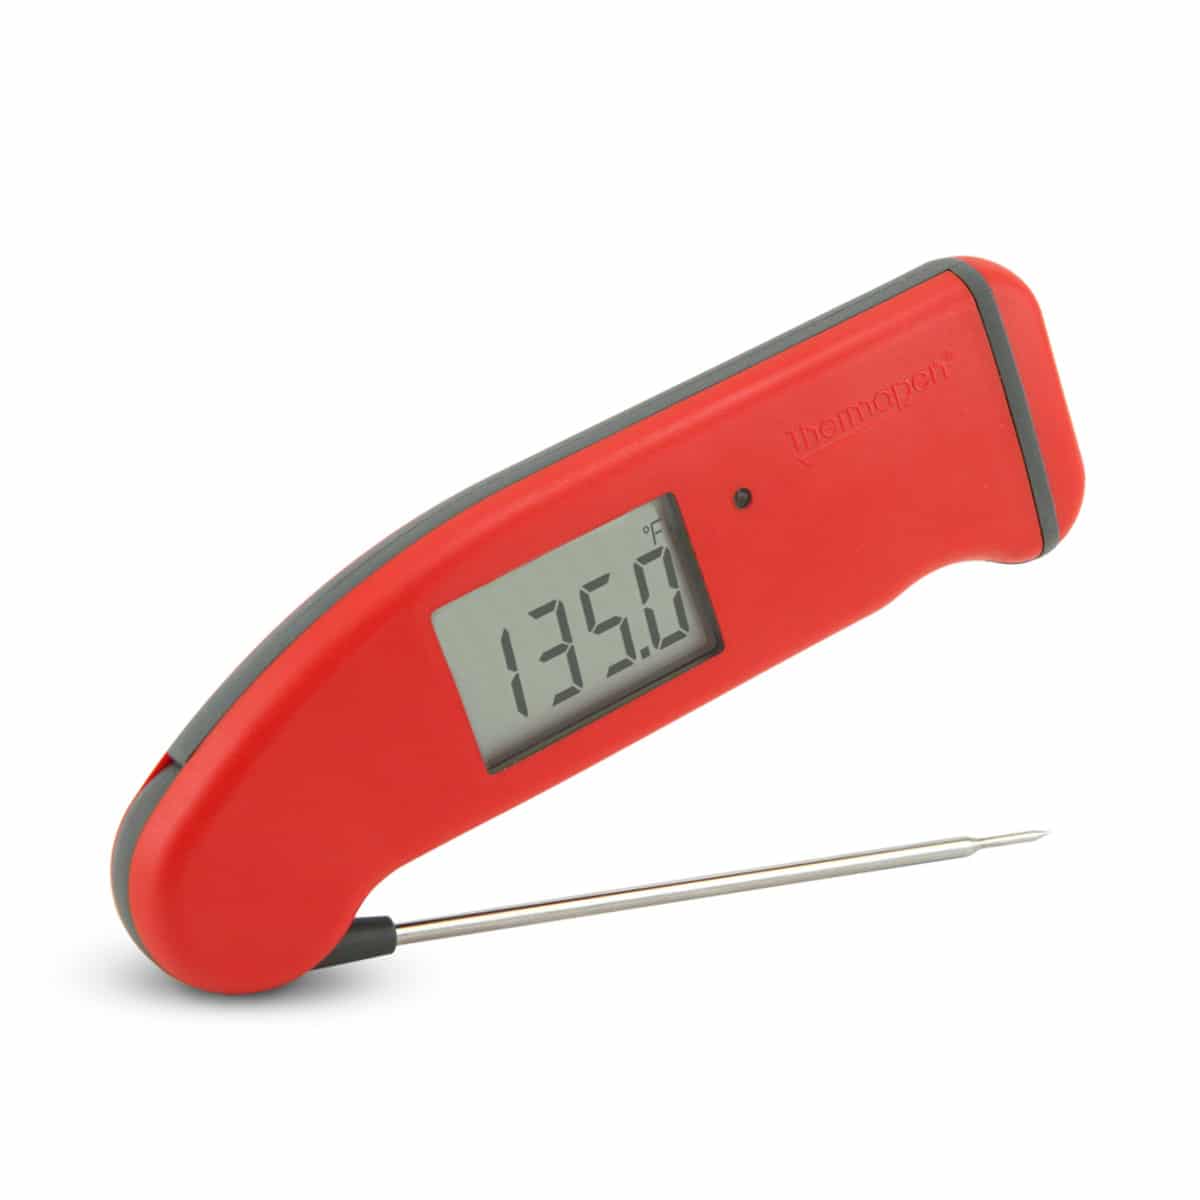 The Thermapen MK4 Meat Thermometer Review And Rating